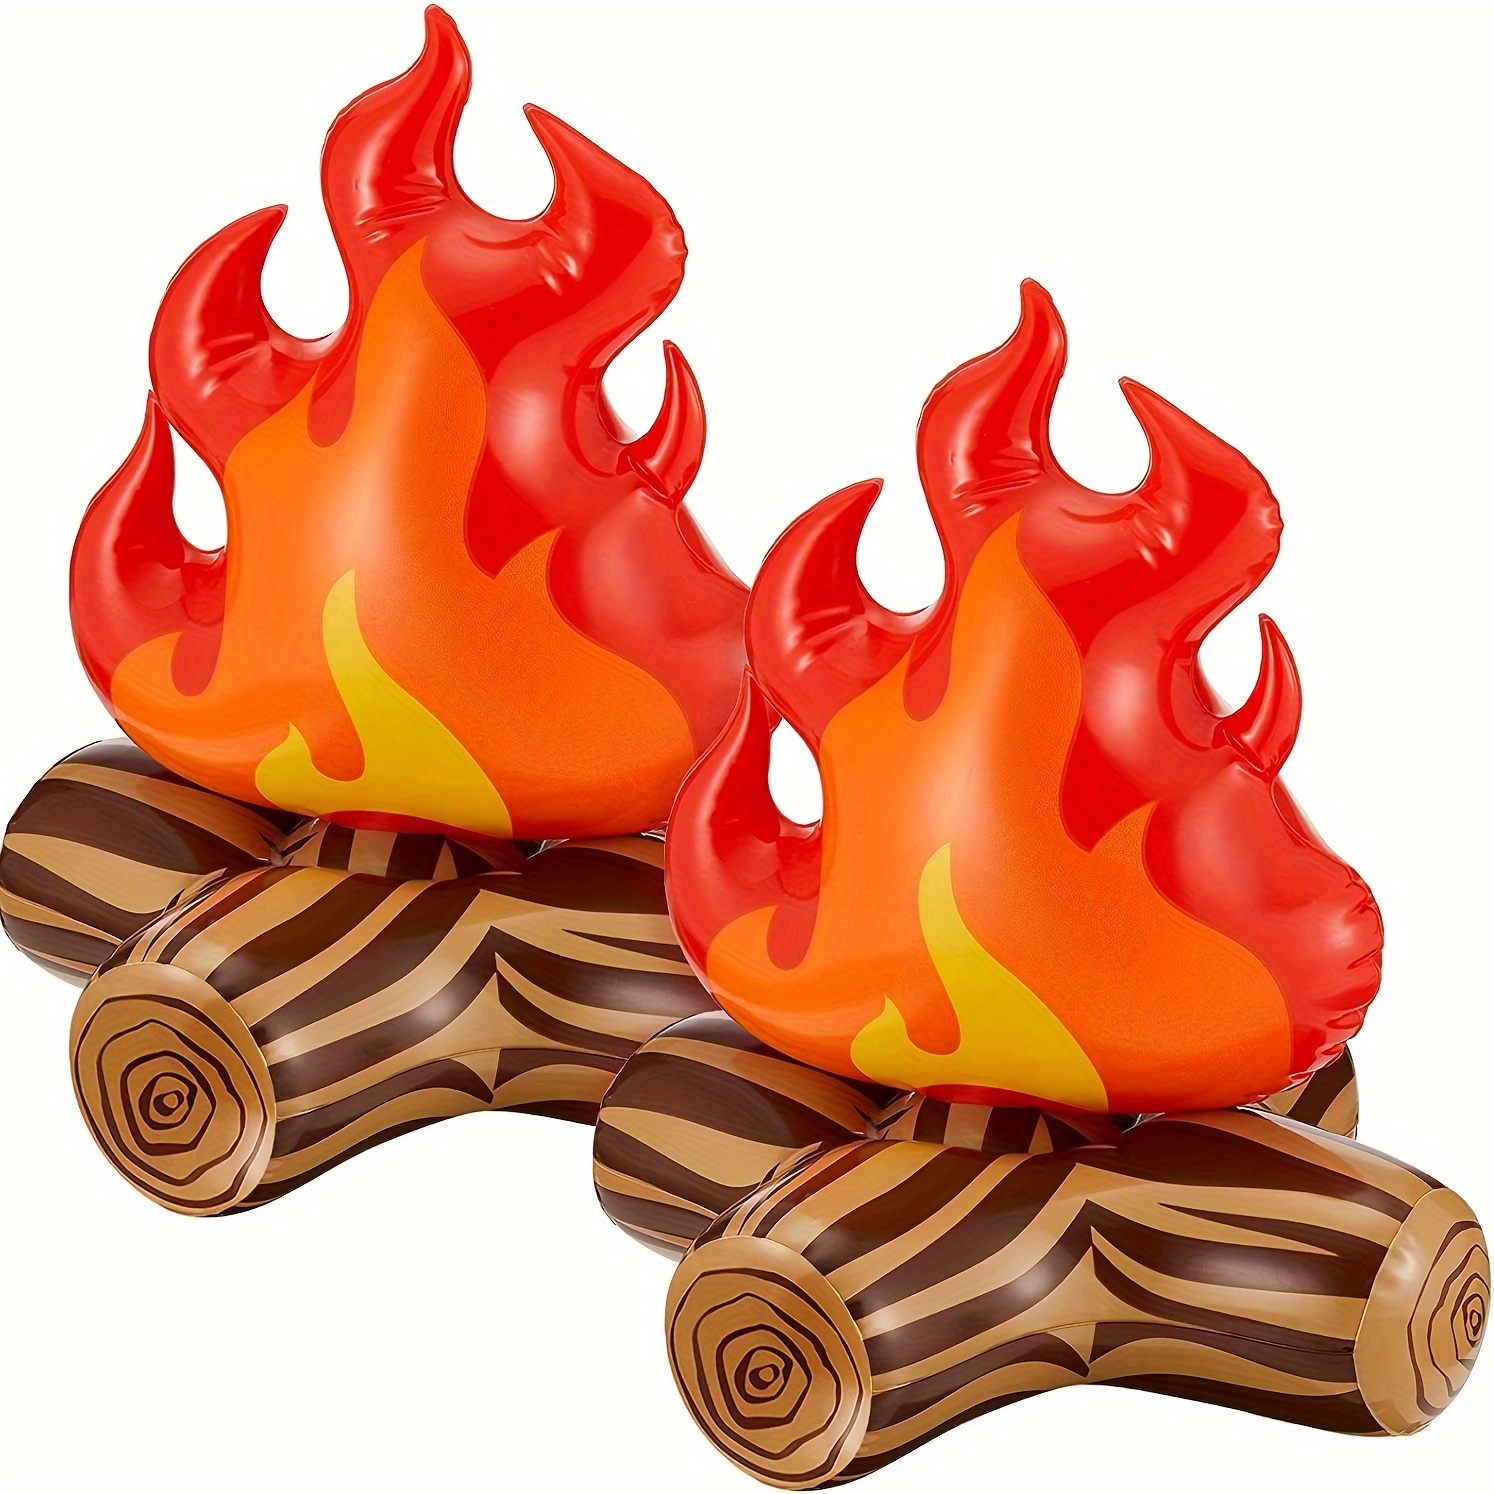 

1/4pcs Inflatable Flame Model Yard Decoration Props Pvc Inflatable Bonfire Camping Party Props Party Supplies Campfire Prop Inflatable Fire Cardboard Fire Flames Halloween 3d Balloon